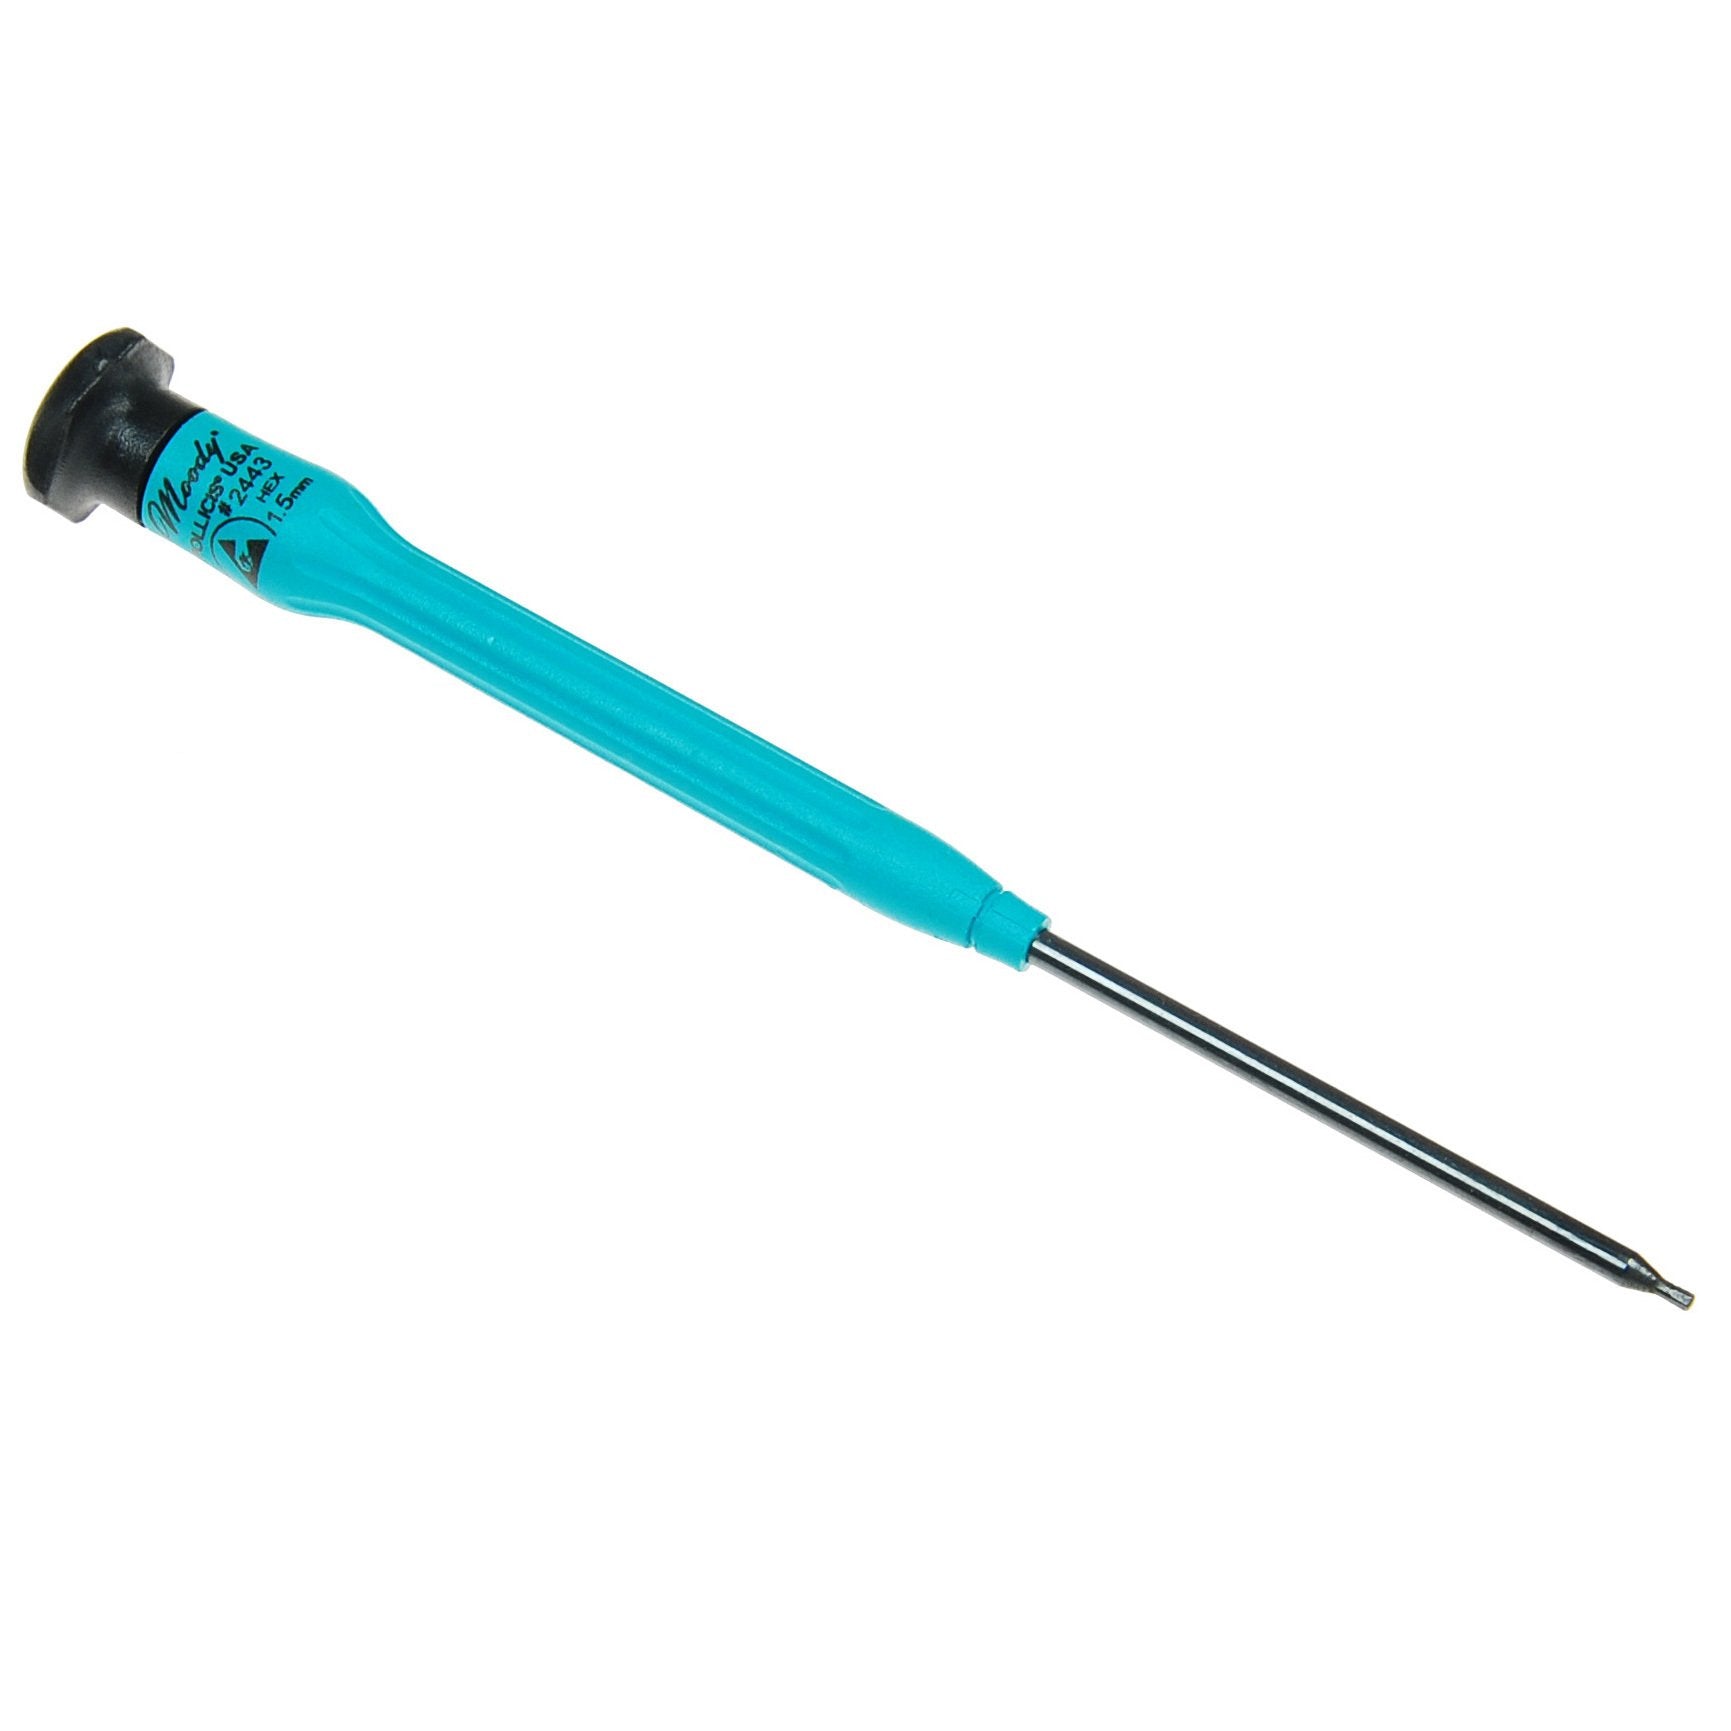 1.5mm Hex Screwdriver New Moody - Made in USA